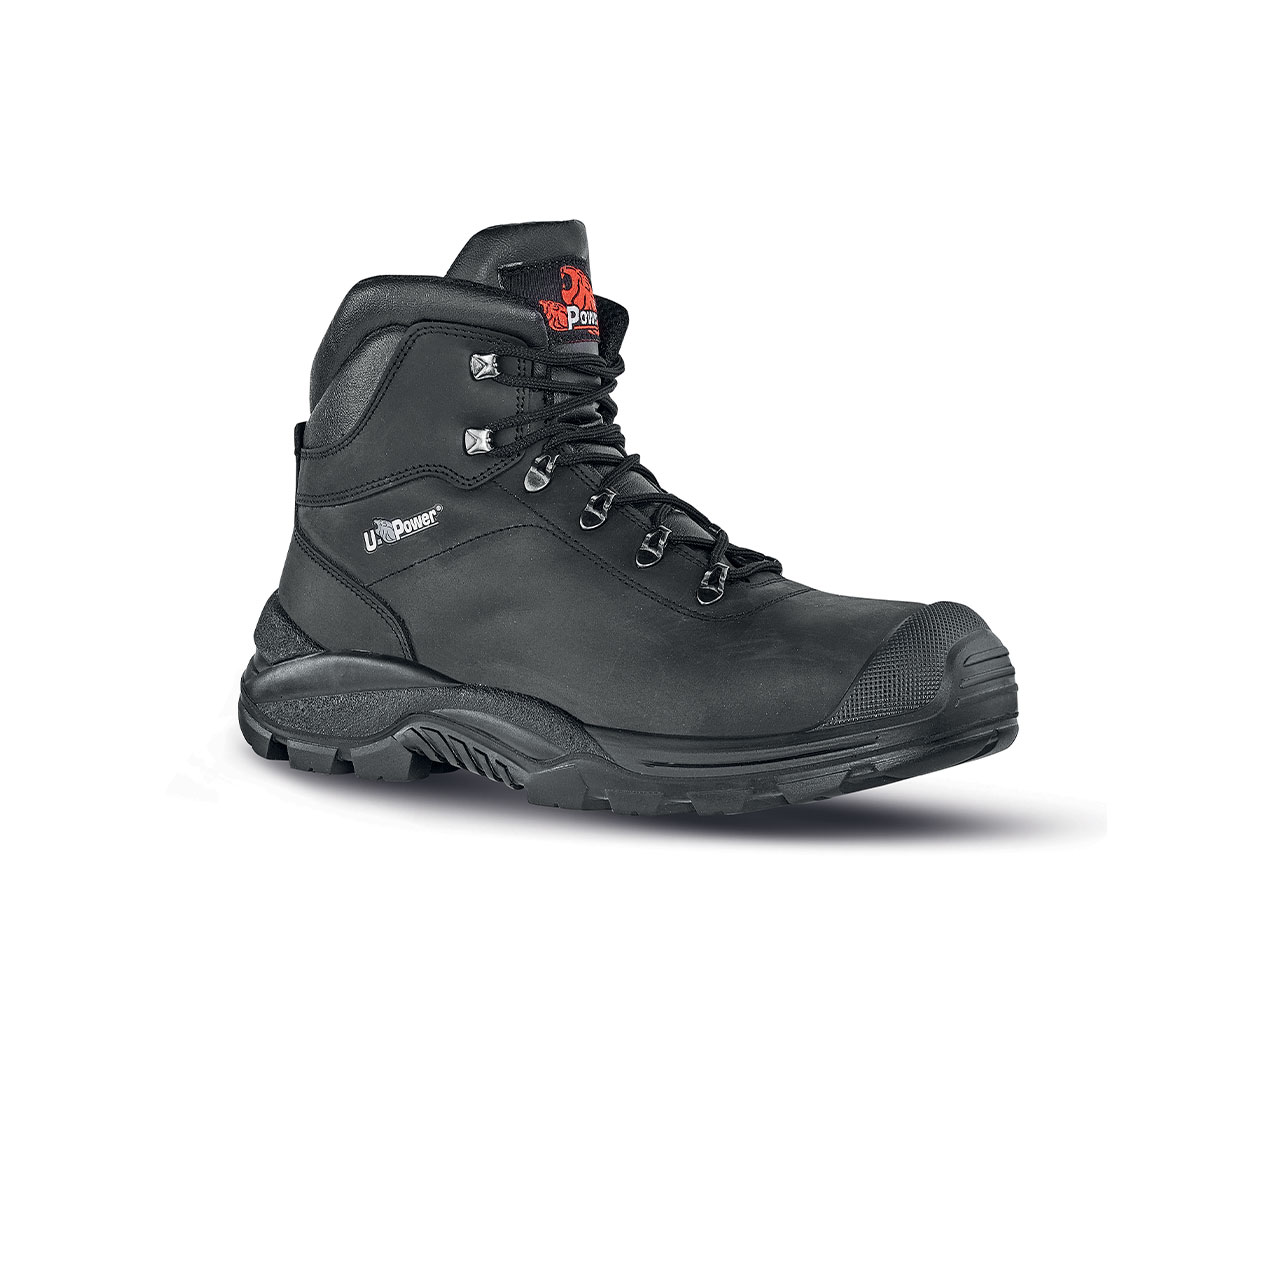 U-Power Domination S3 Safety Boots Review 